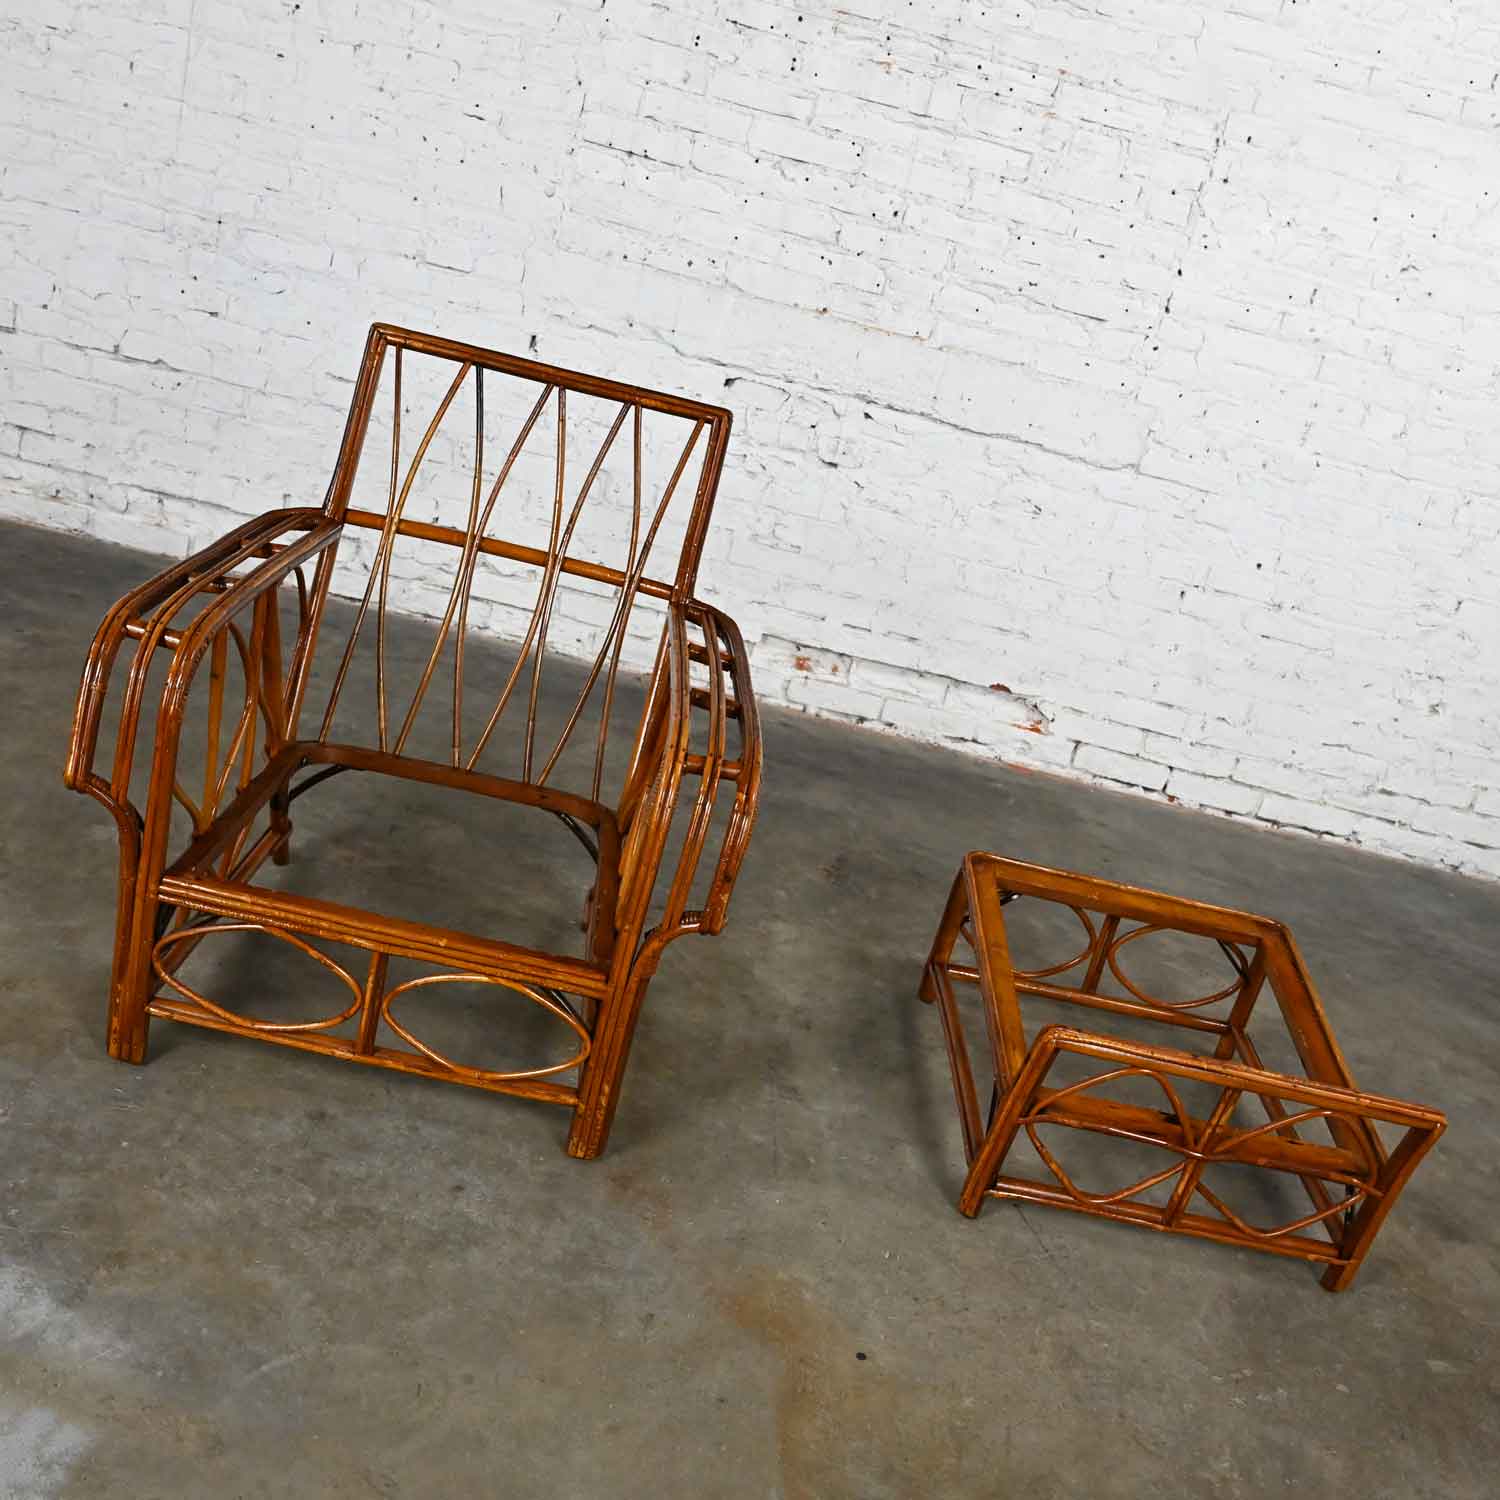 Early 20th Century Rattan Lounge Chair & Ottoman Orange Fabric Cushions by Helmers Manufacturing Company